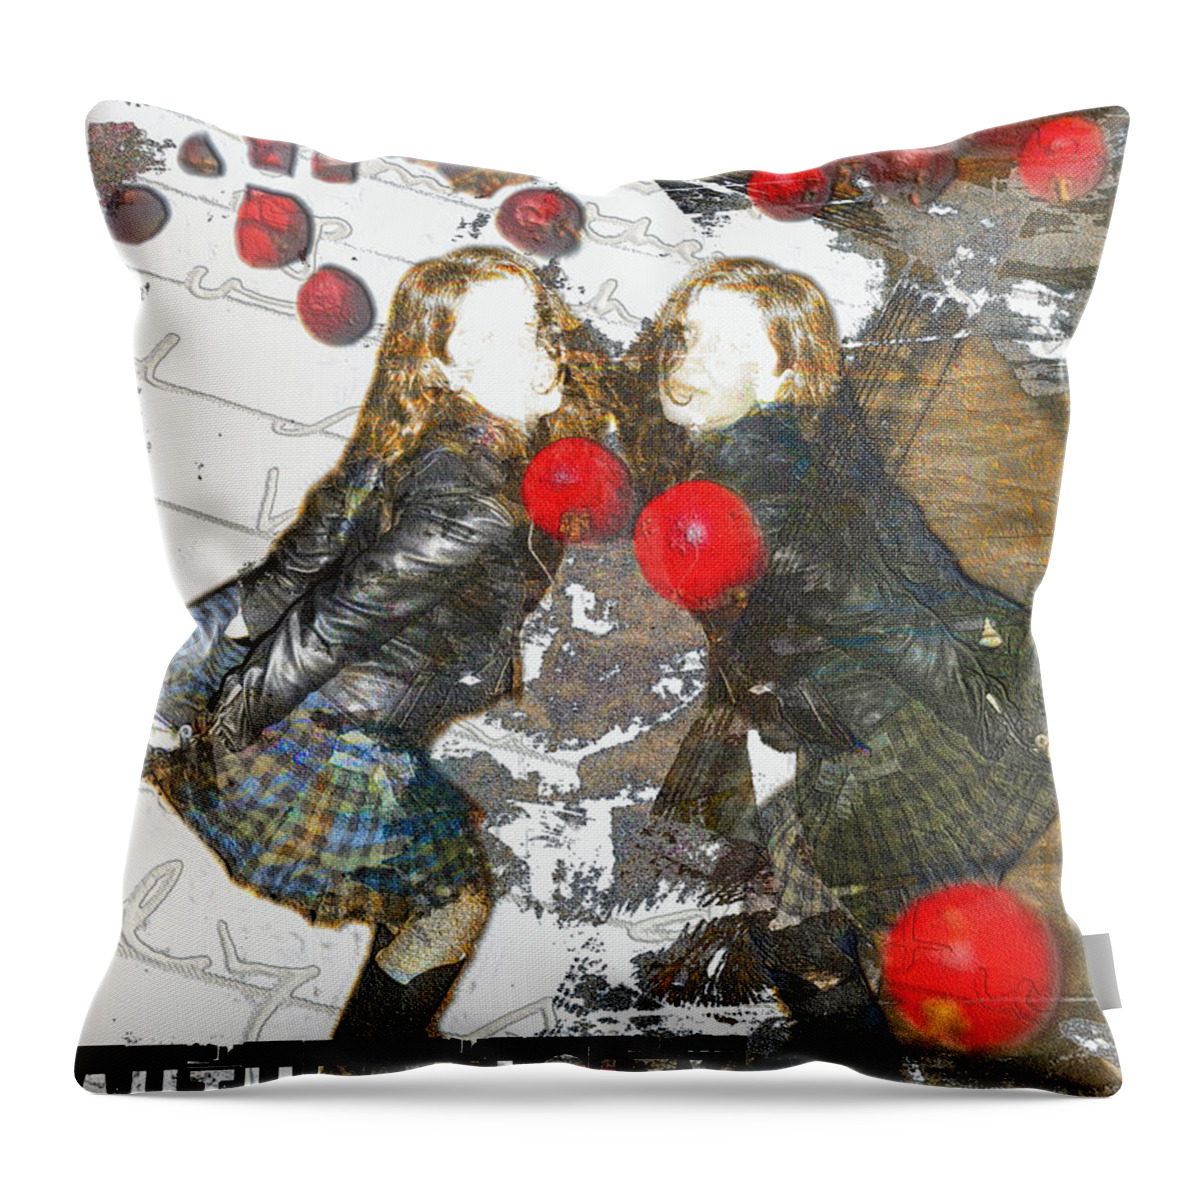 Girls Throw Pillow featuring the digital art Authenticity by Melissa D Johnston